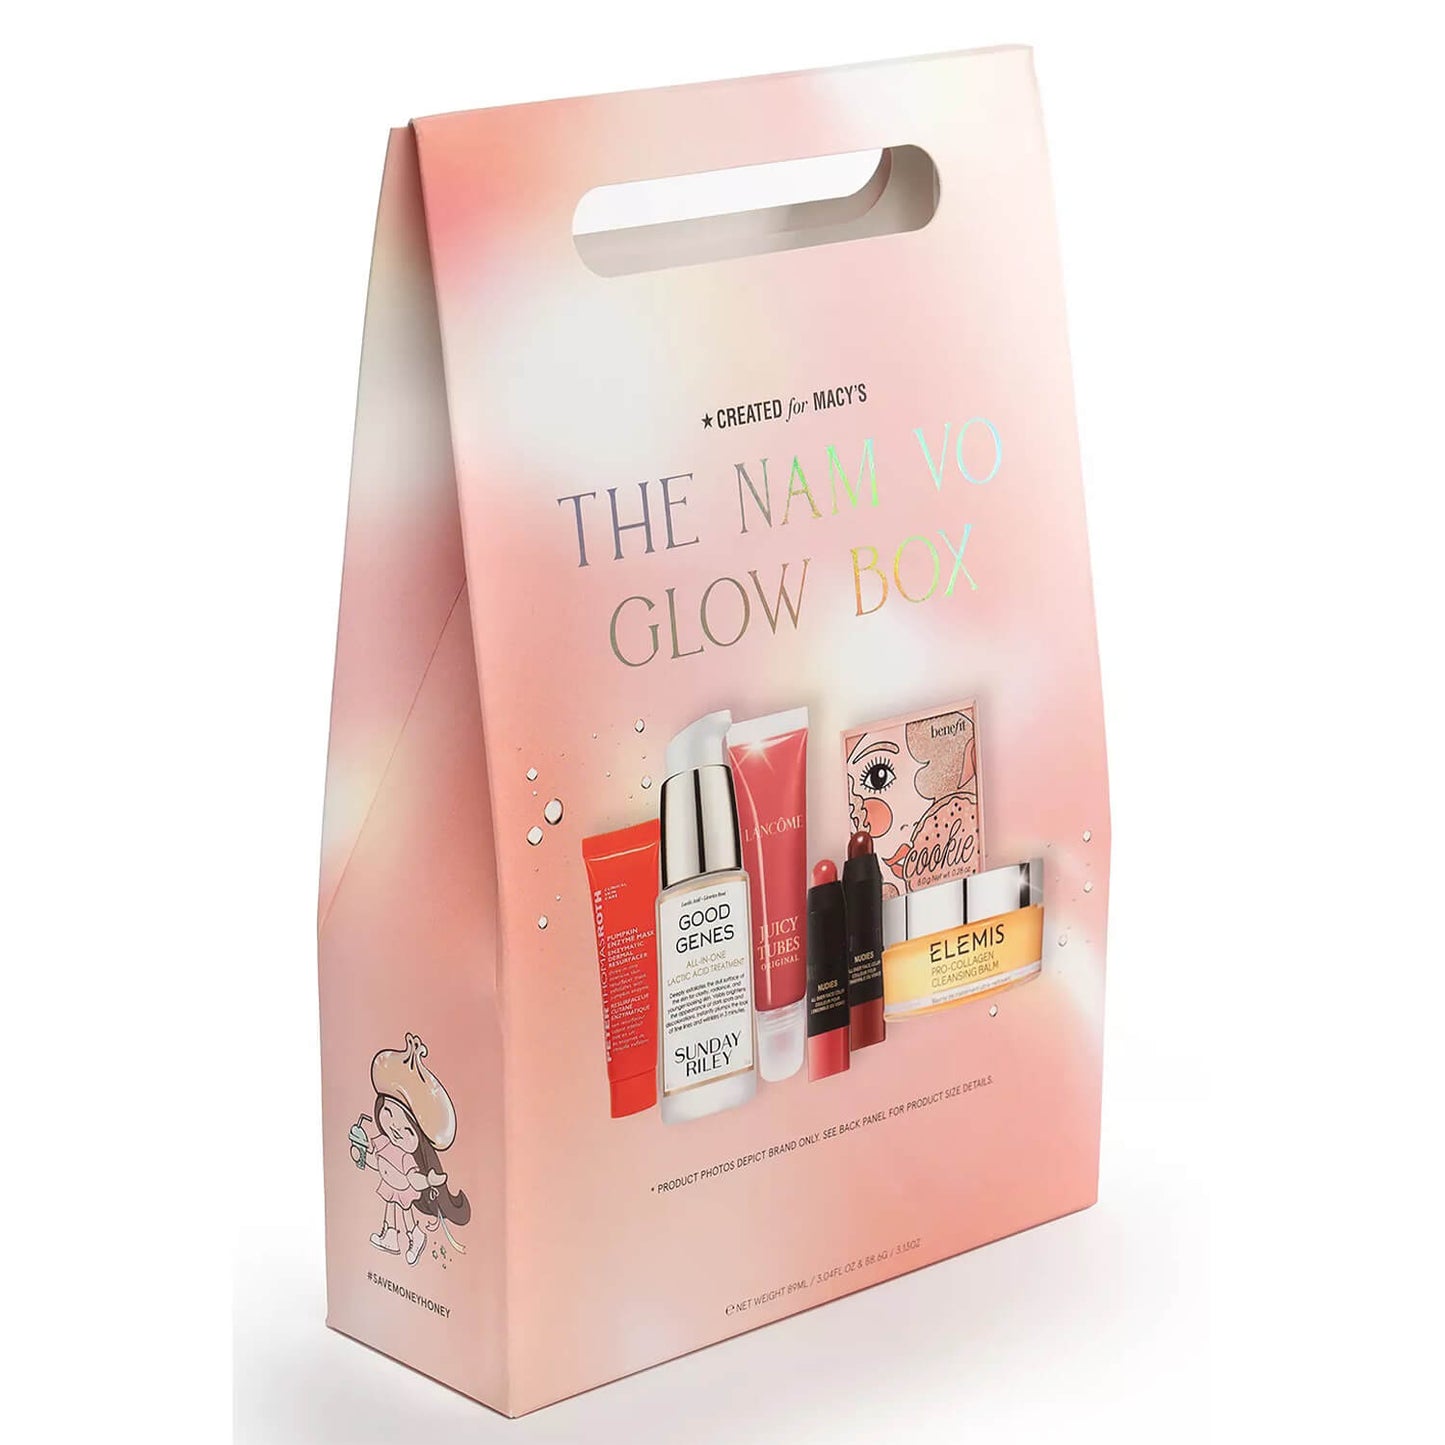 shop Nam Vo Glow Skincare and Makeup Set available at Heygirl.pk for delivery in Pakistan